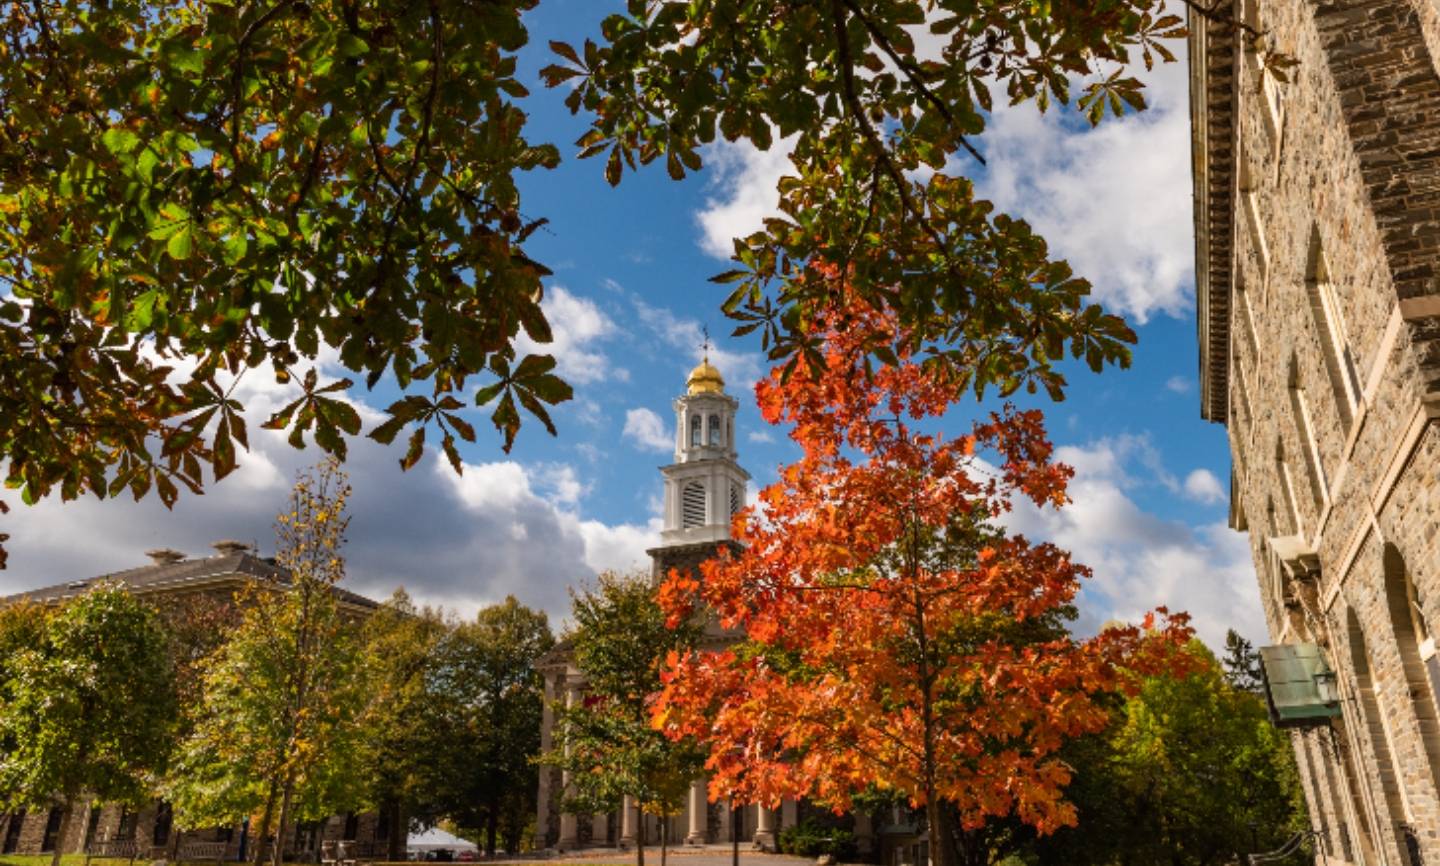 Campus fall scenic view of tree and sky and Chapel in the background.